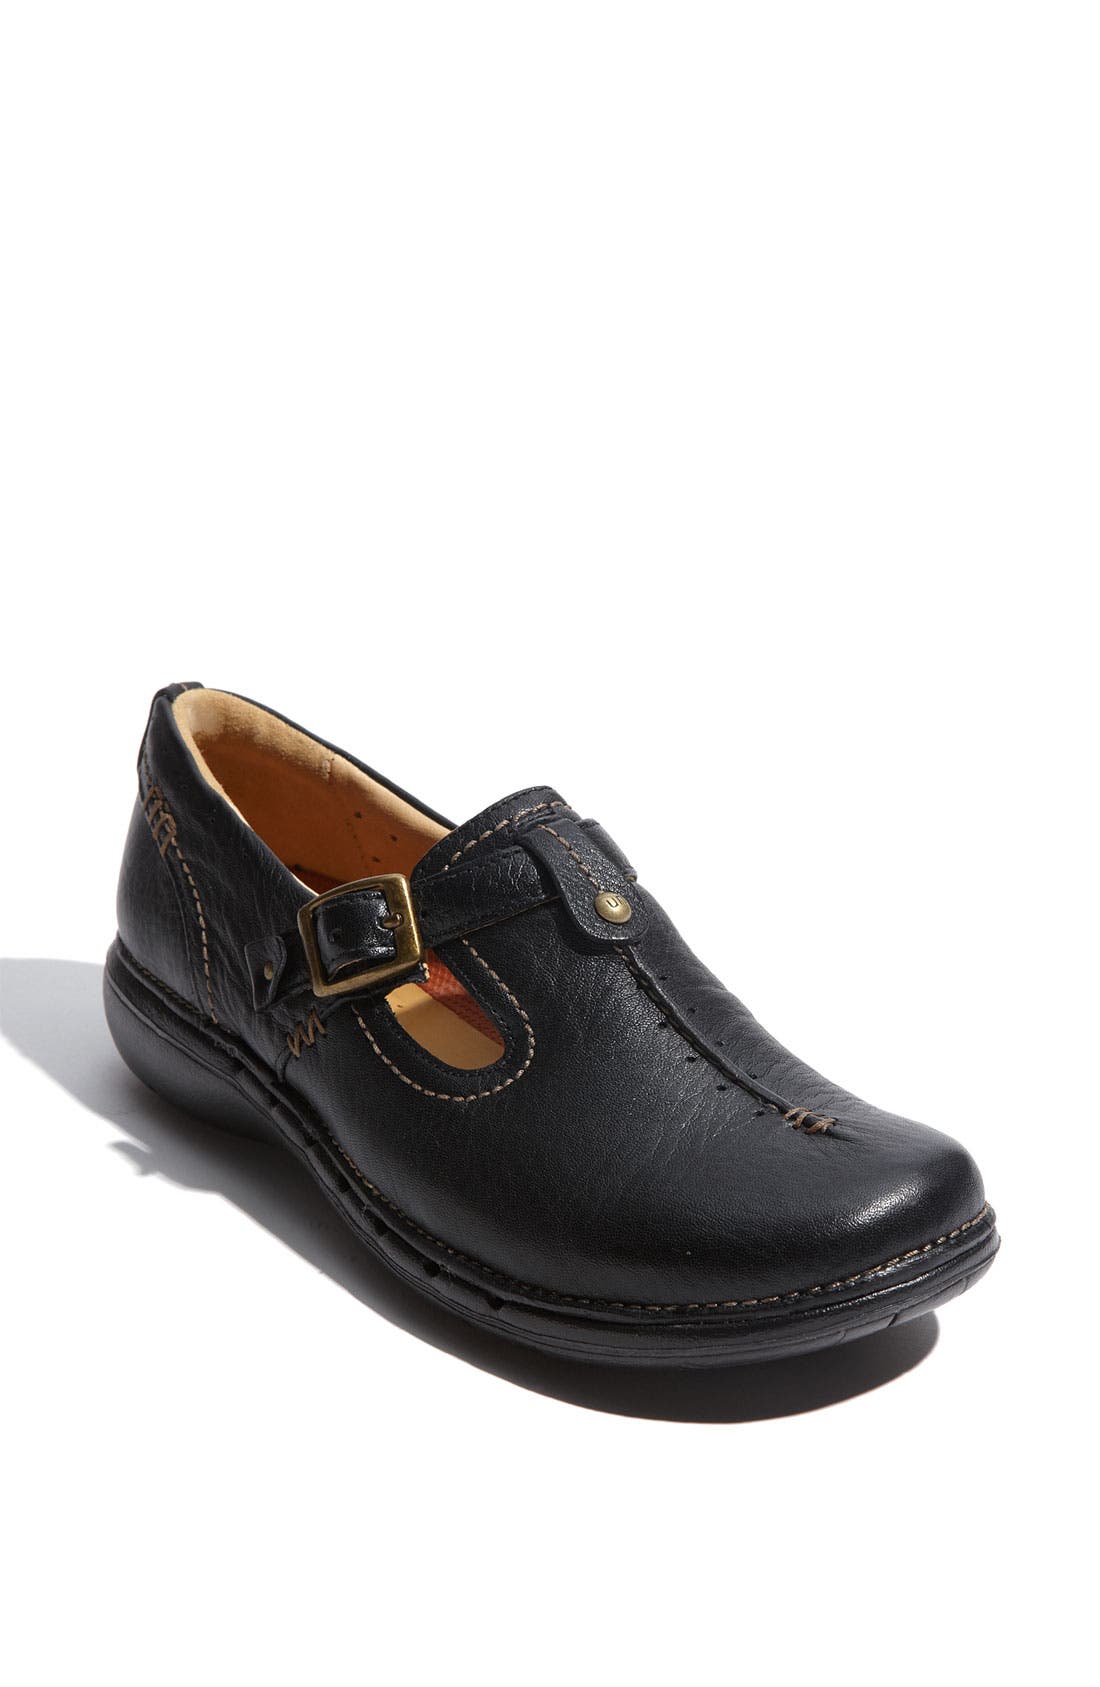 clarks womens unstructured